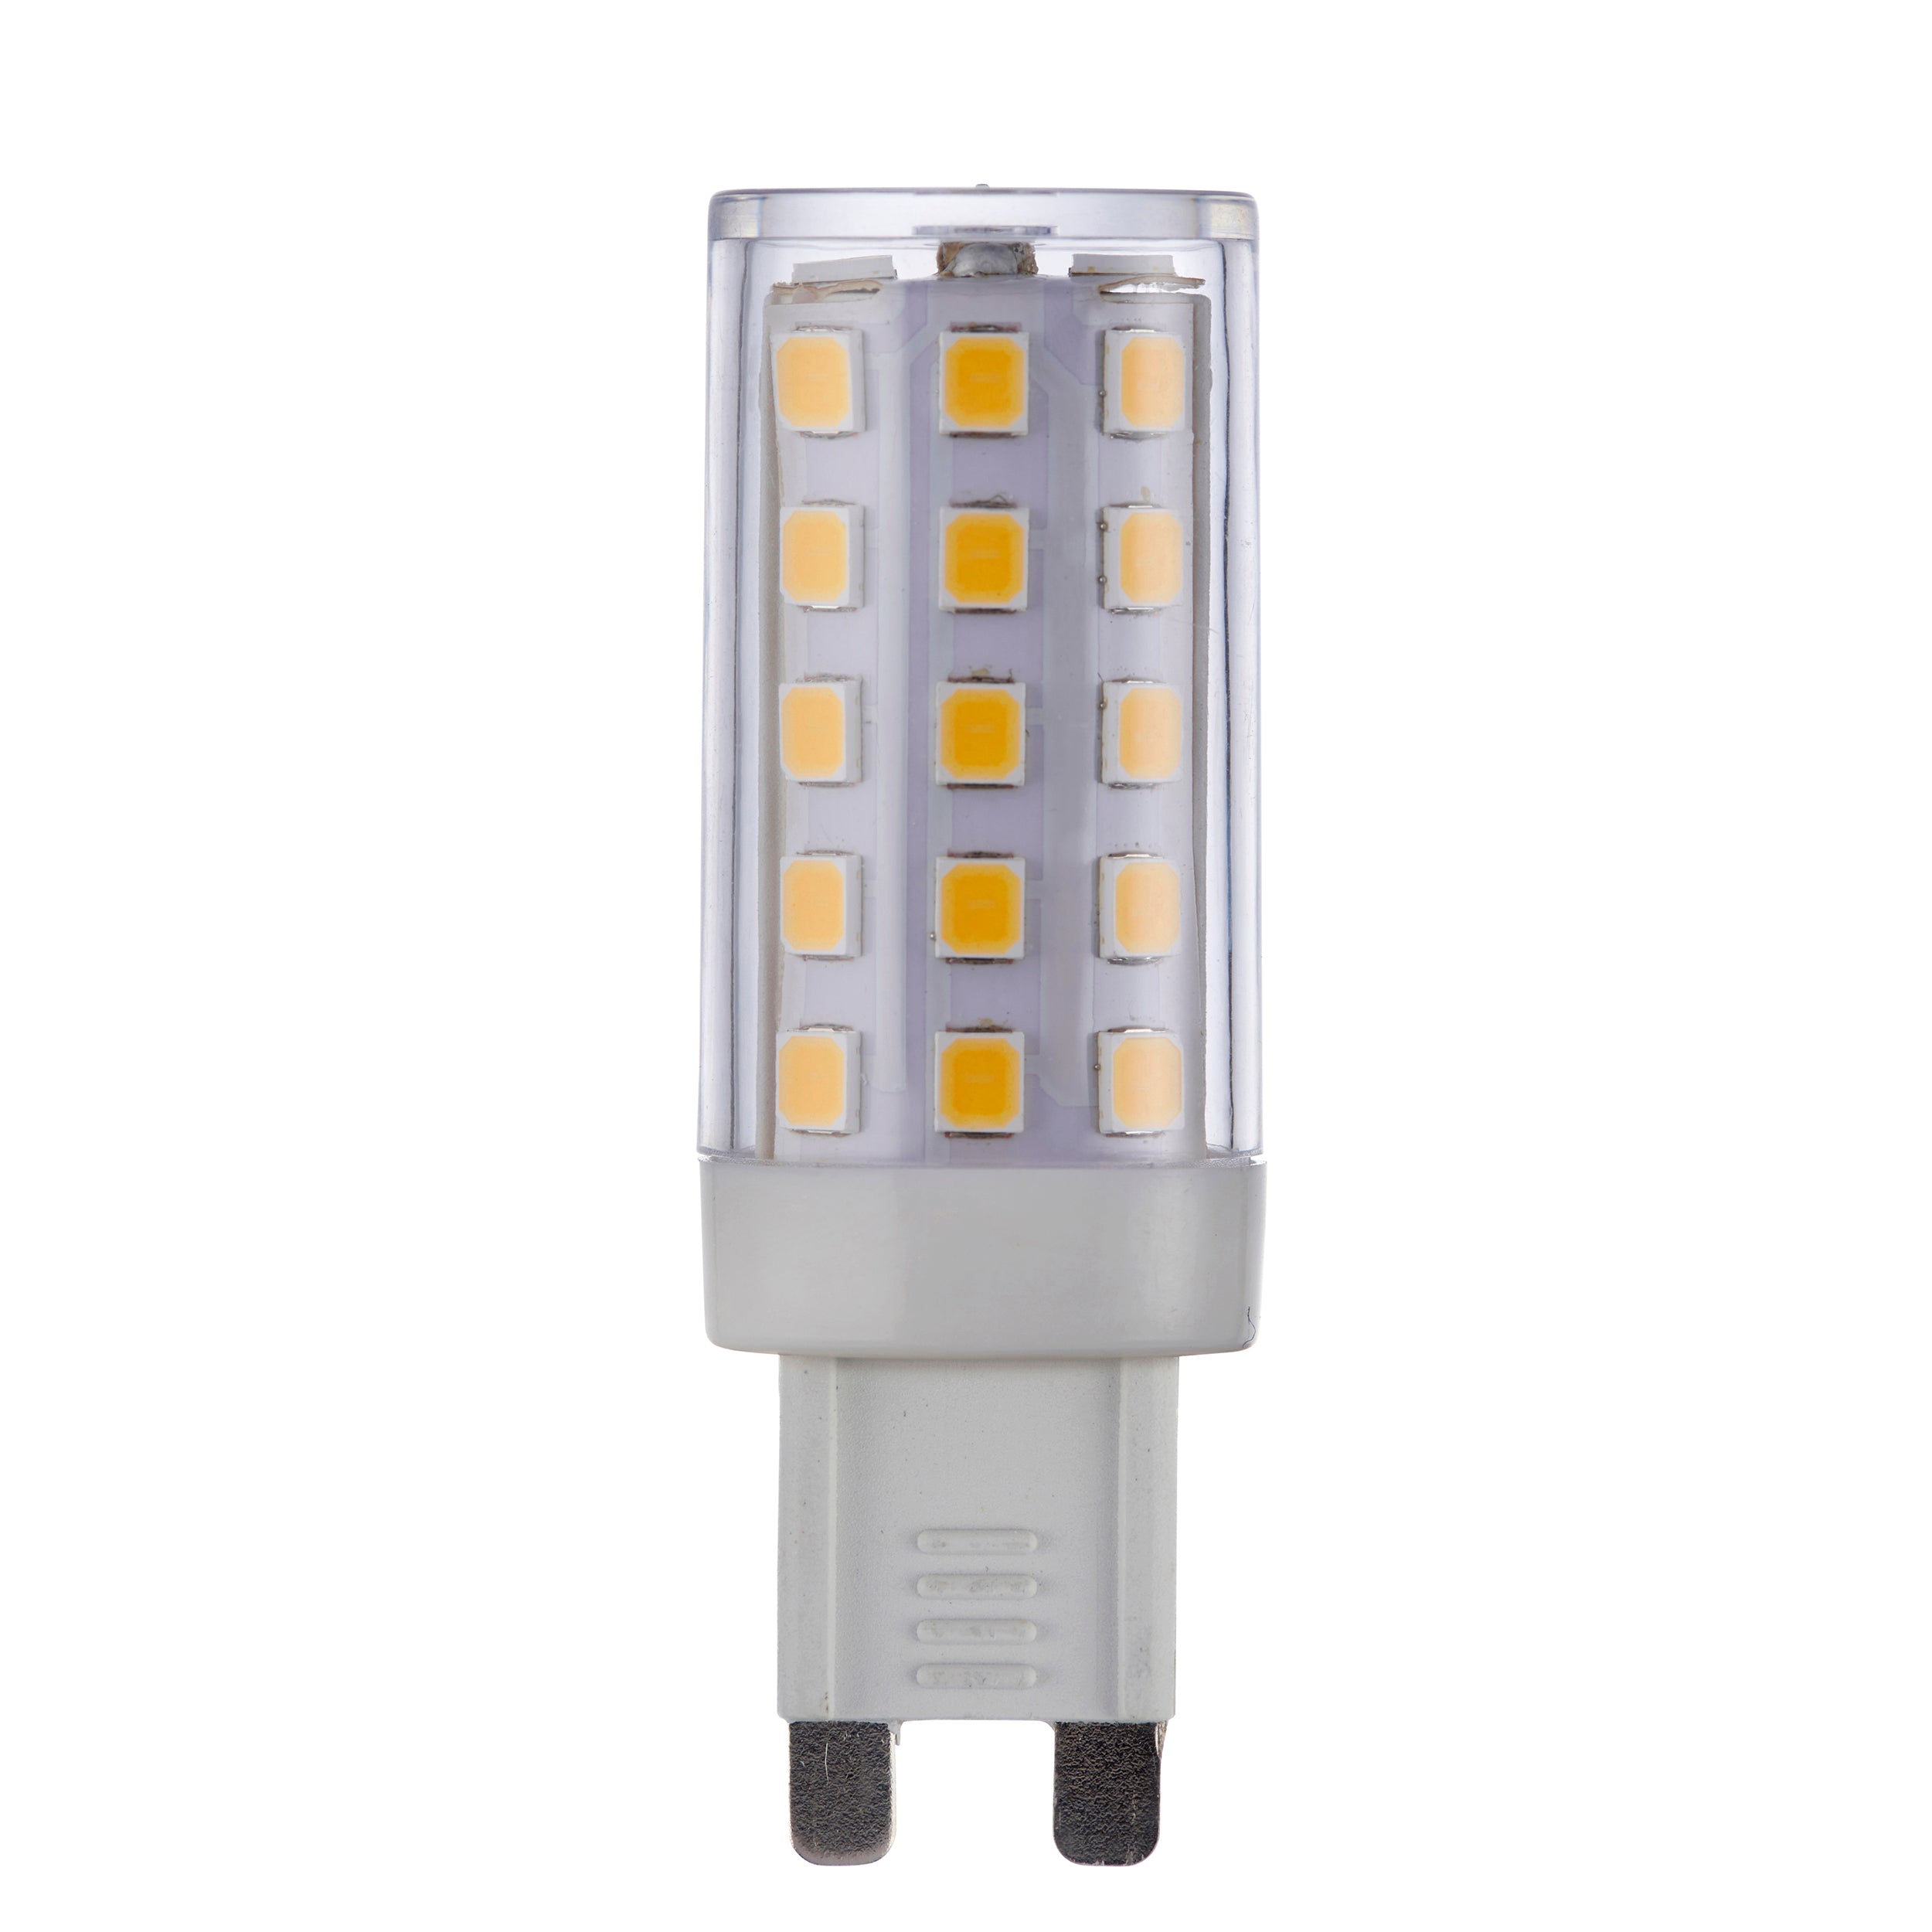 G9 LED Capsule Bulb. Dimmable 470LM Cool White 4000K 4.8W